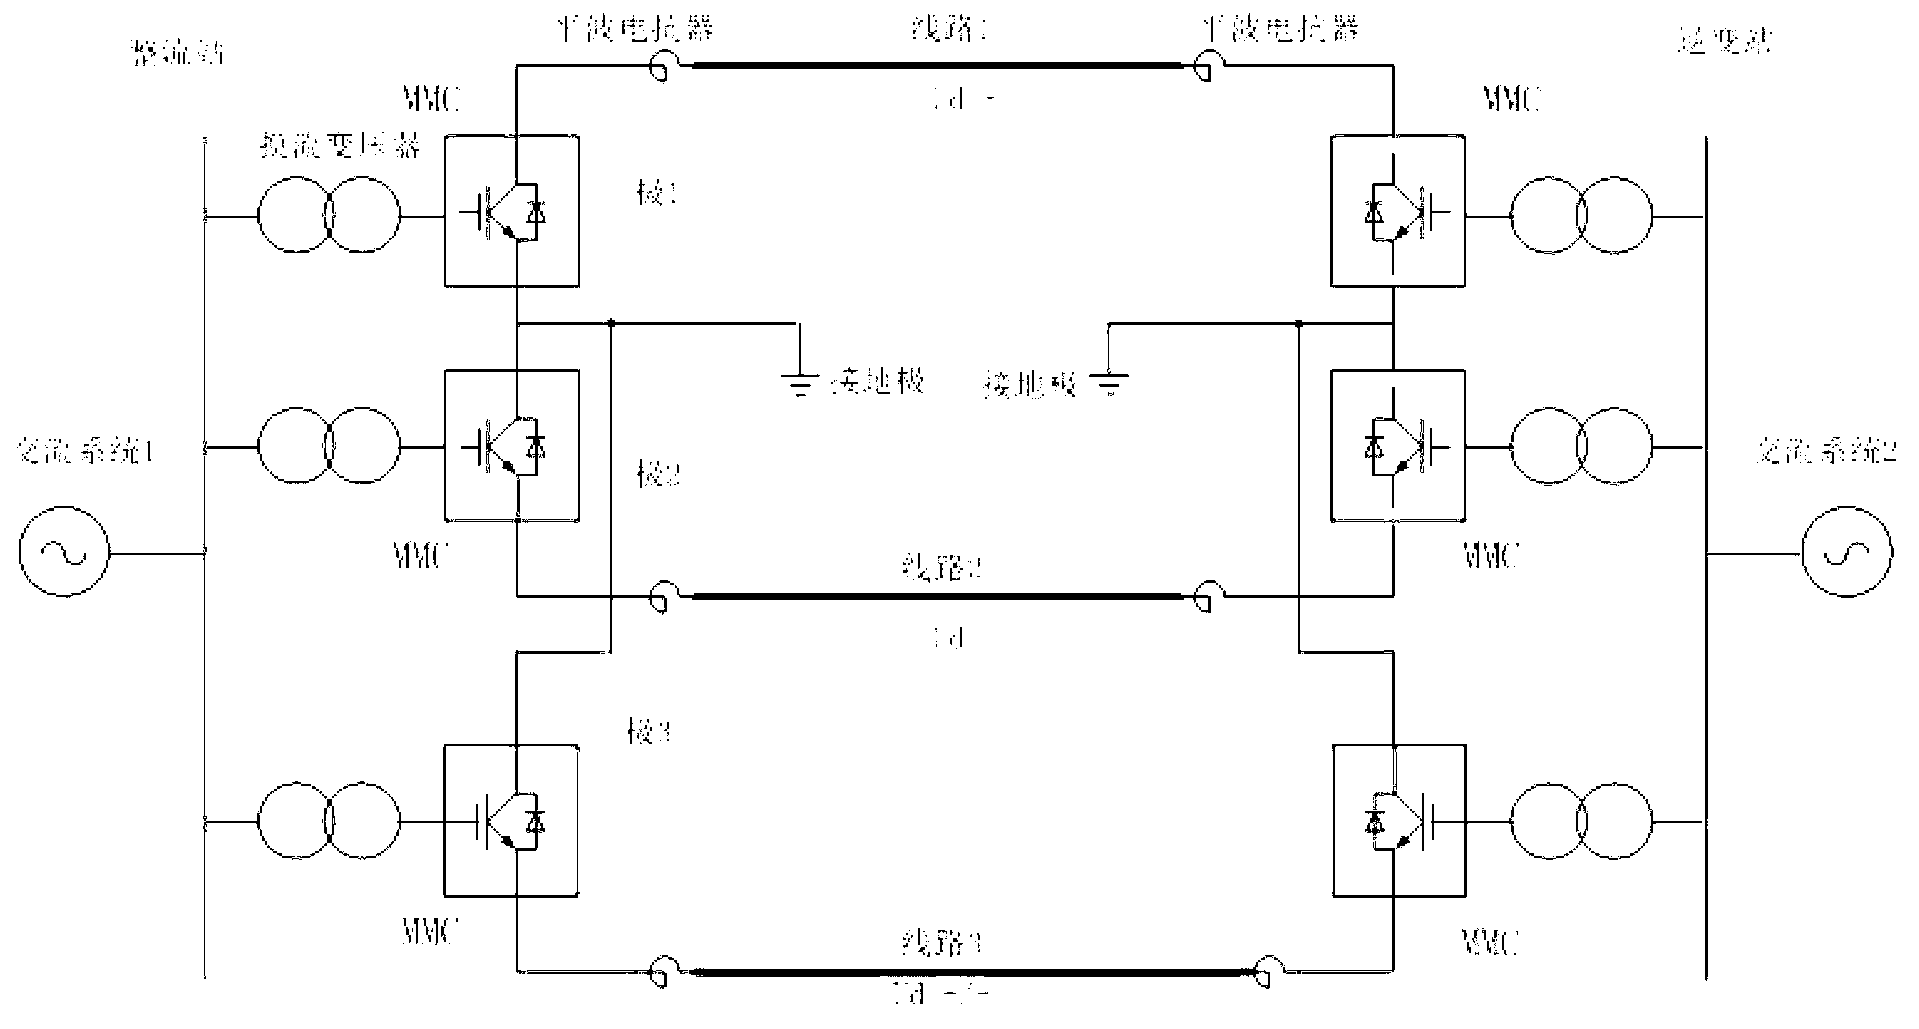 Tri-pole direct current transmission system topology structure based on modular multi-level converter (MMC)